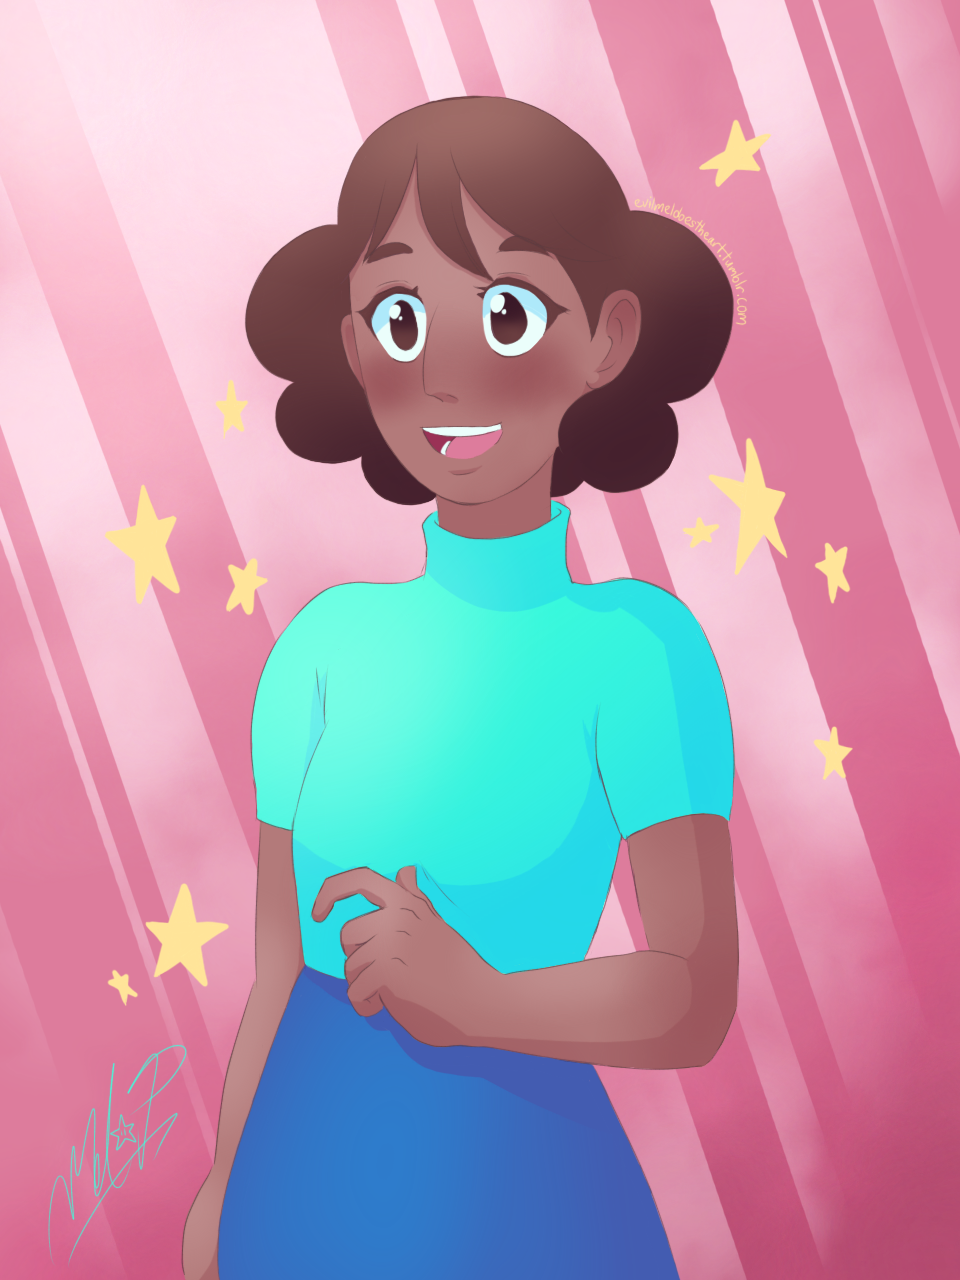 Connie’s new doo is absolutely adorable ♡